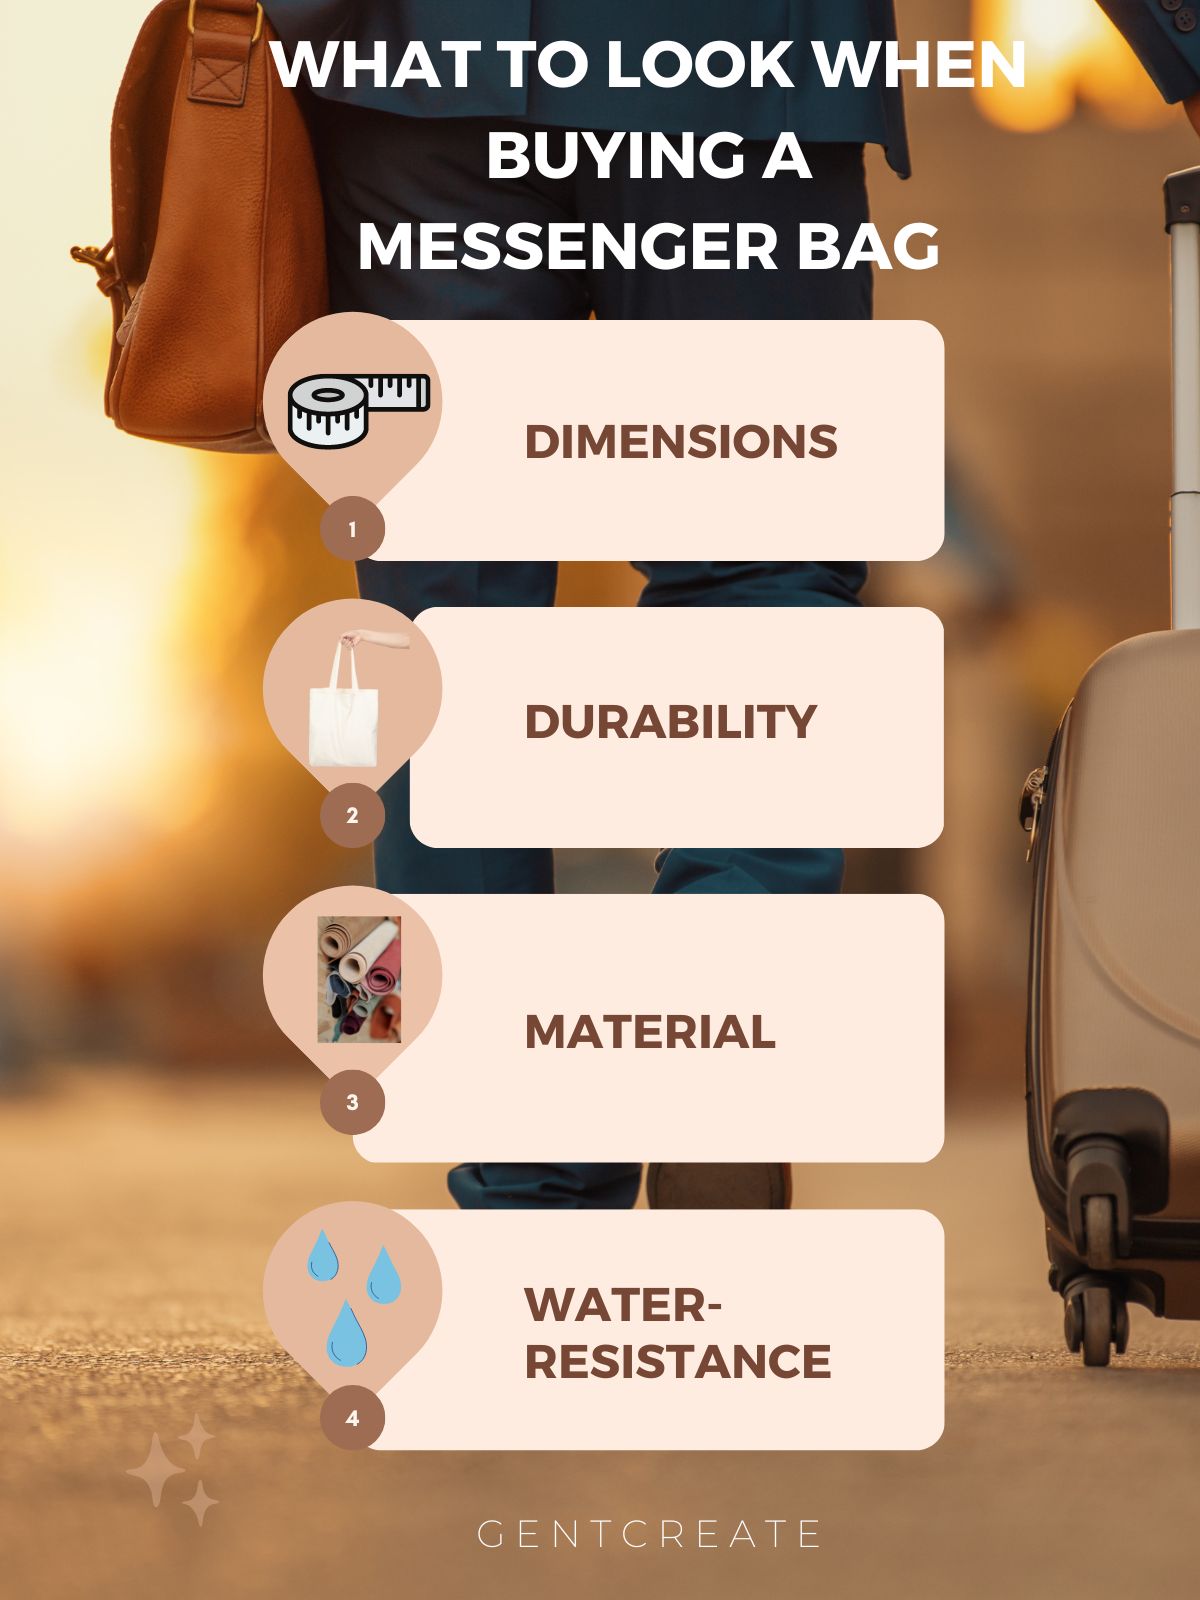 What To Look When Buying A Messenger Bag?